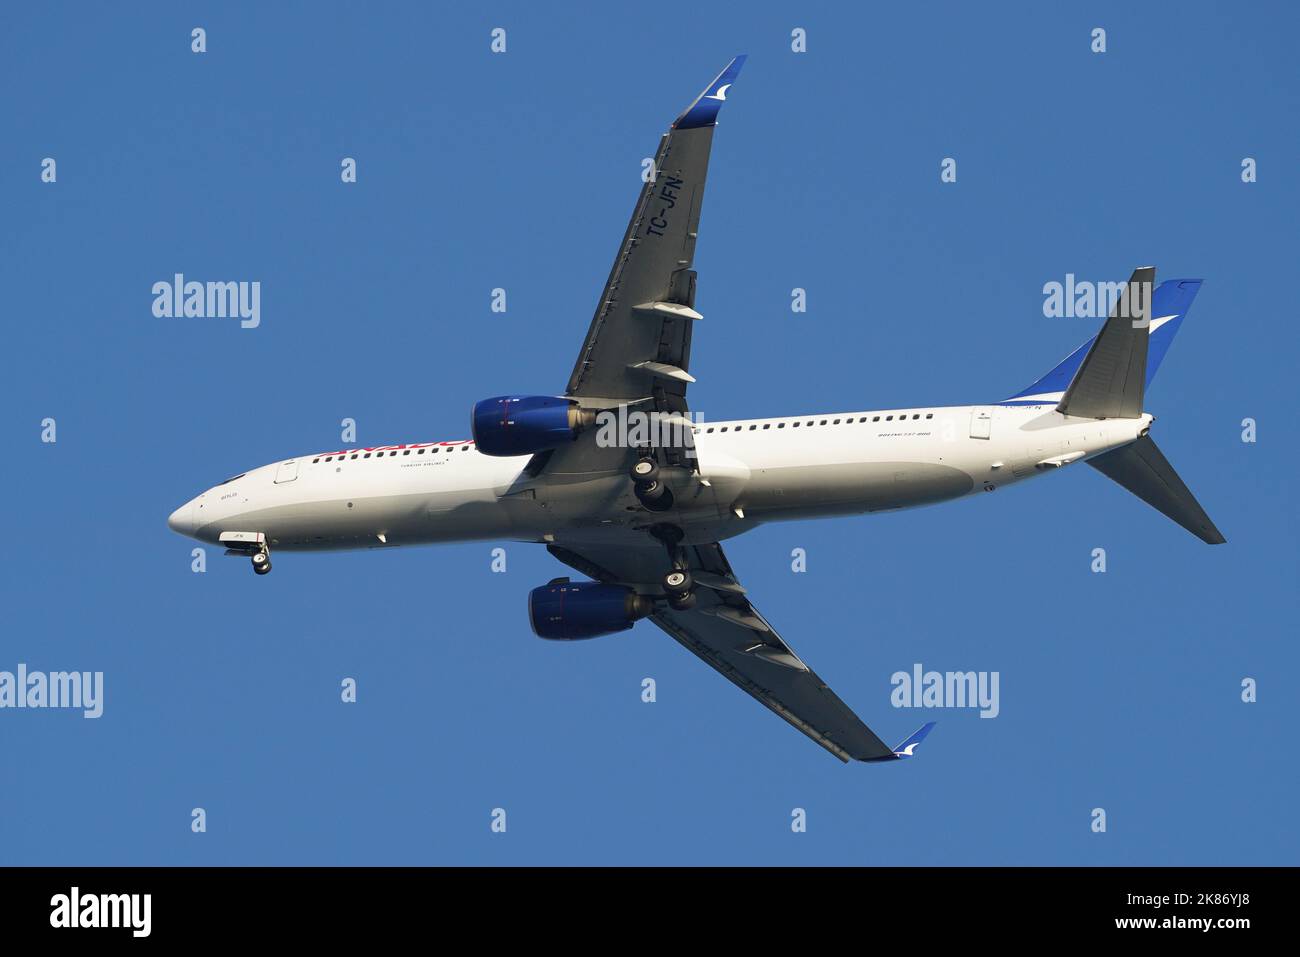 ISTANBUL, TURKEY - MAY 27, 2022: AnadoluJet Airlines Boeing 737-8F2 (29776) landing to Istanbul Sabiha Gokcen Airport Stock Photo